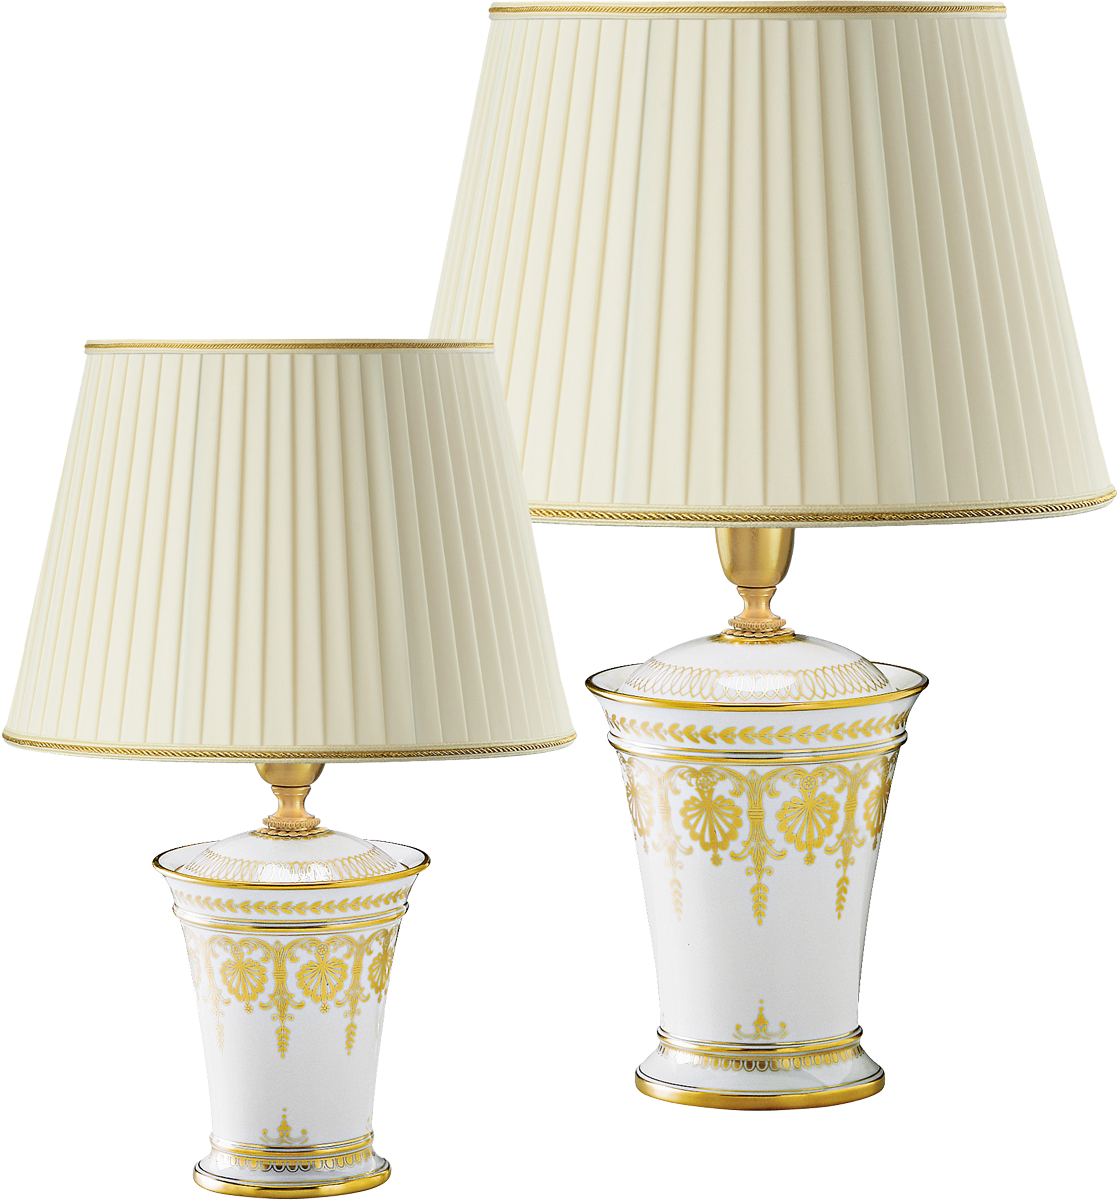 TABLE LAMP 4148